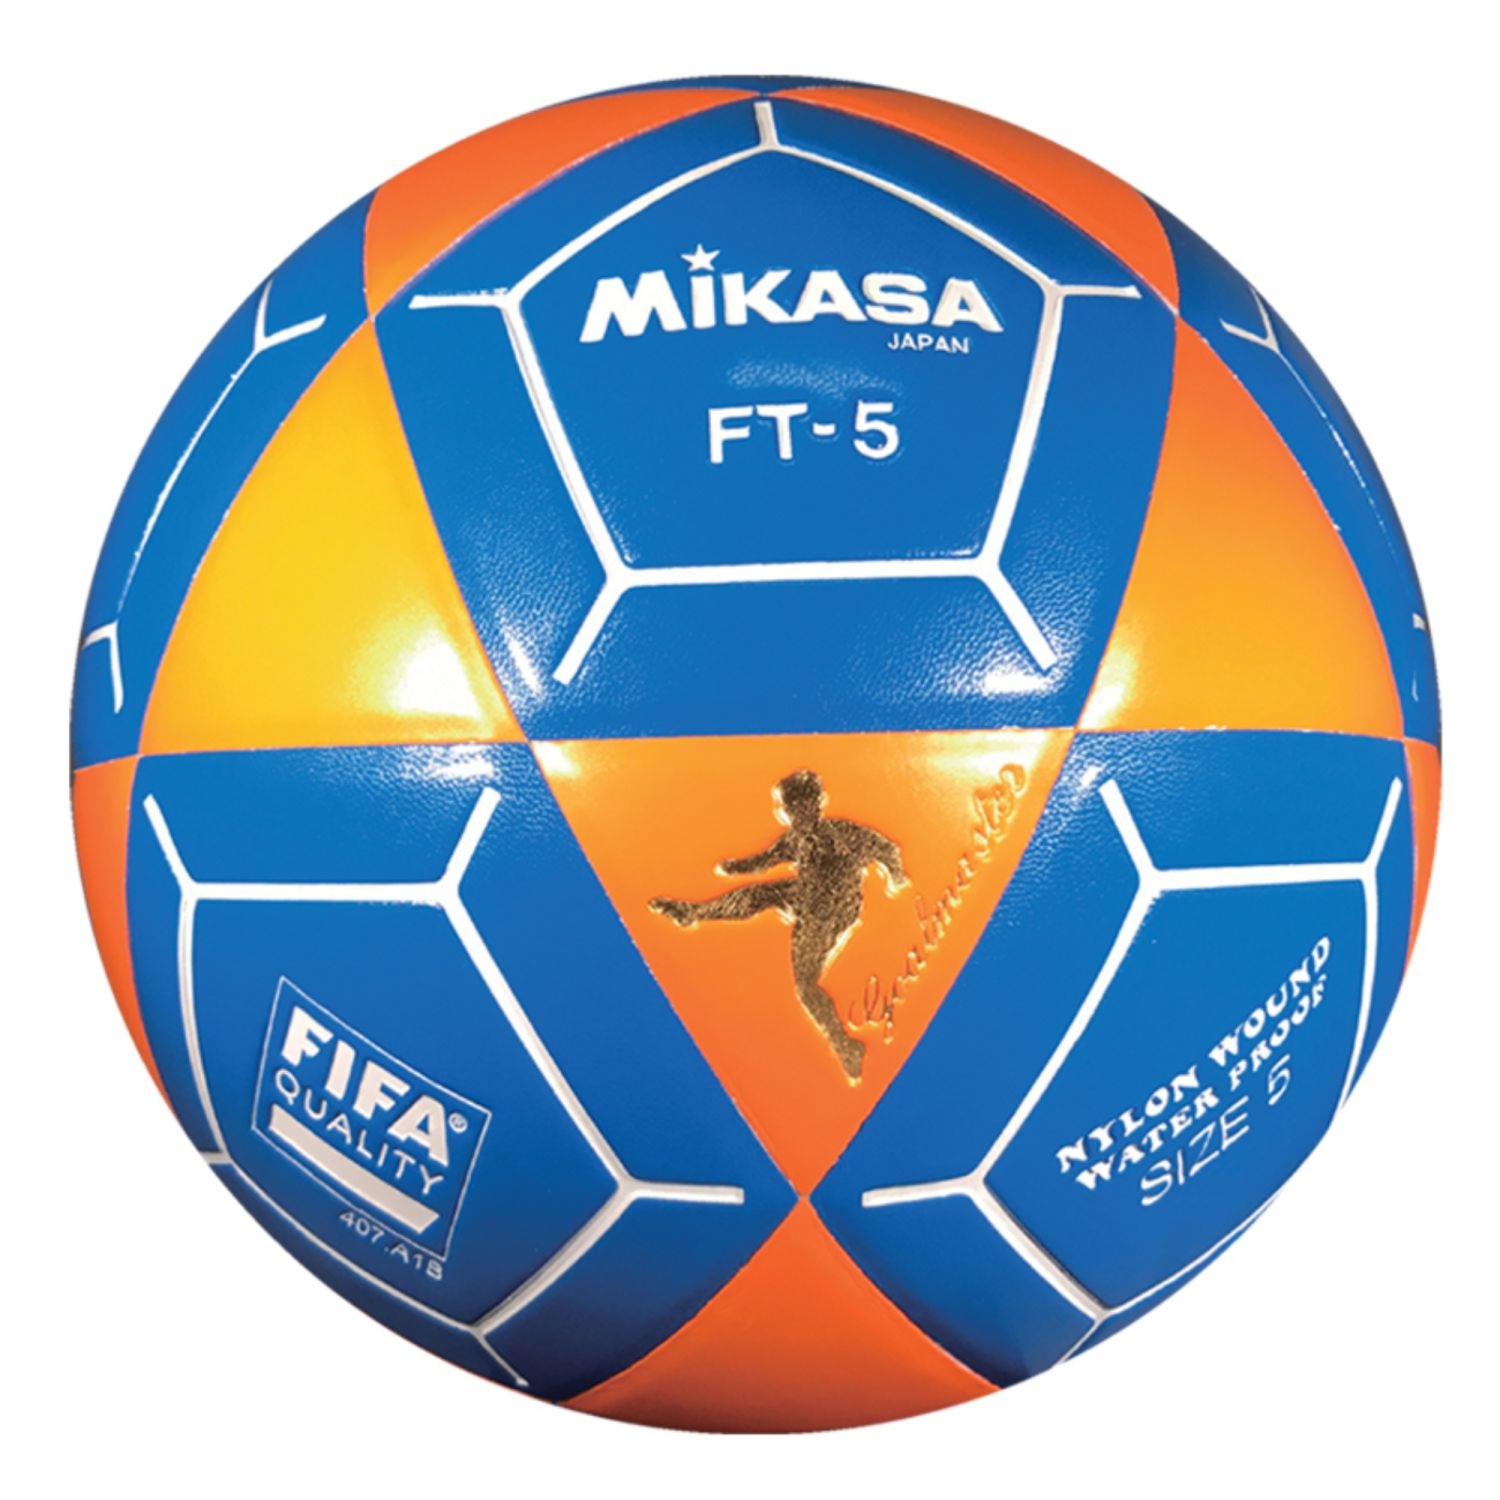 Mikasa Goal Master Soccer Ball - FT-5 Official FIFA and NFA Footvolley Size 5, Orange/Blue